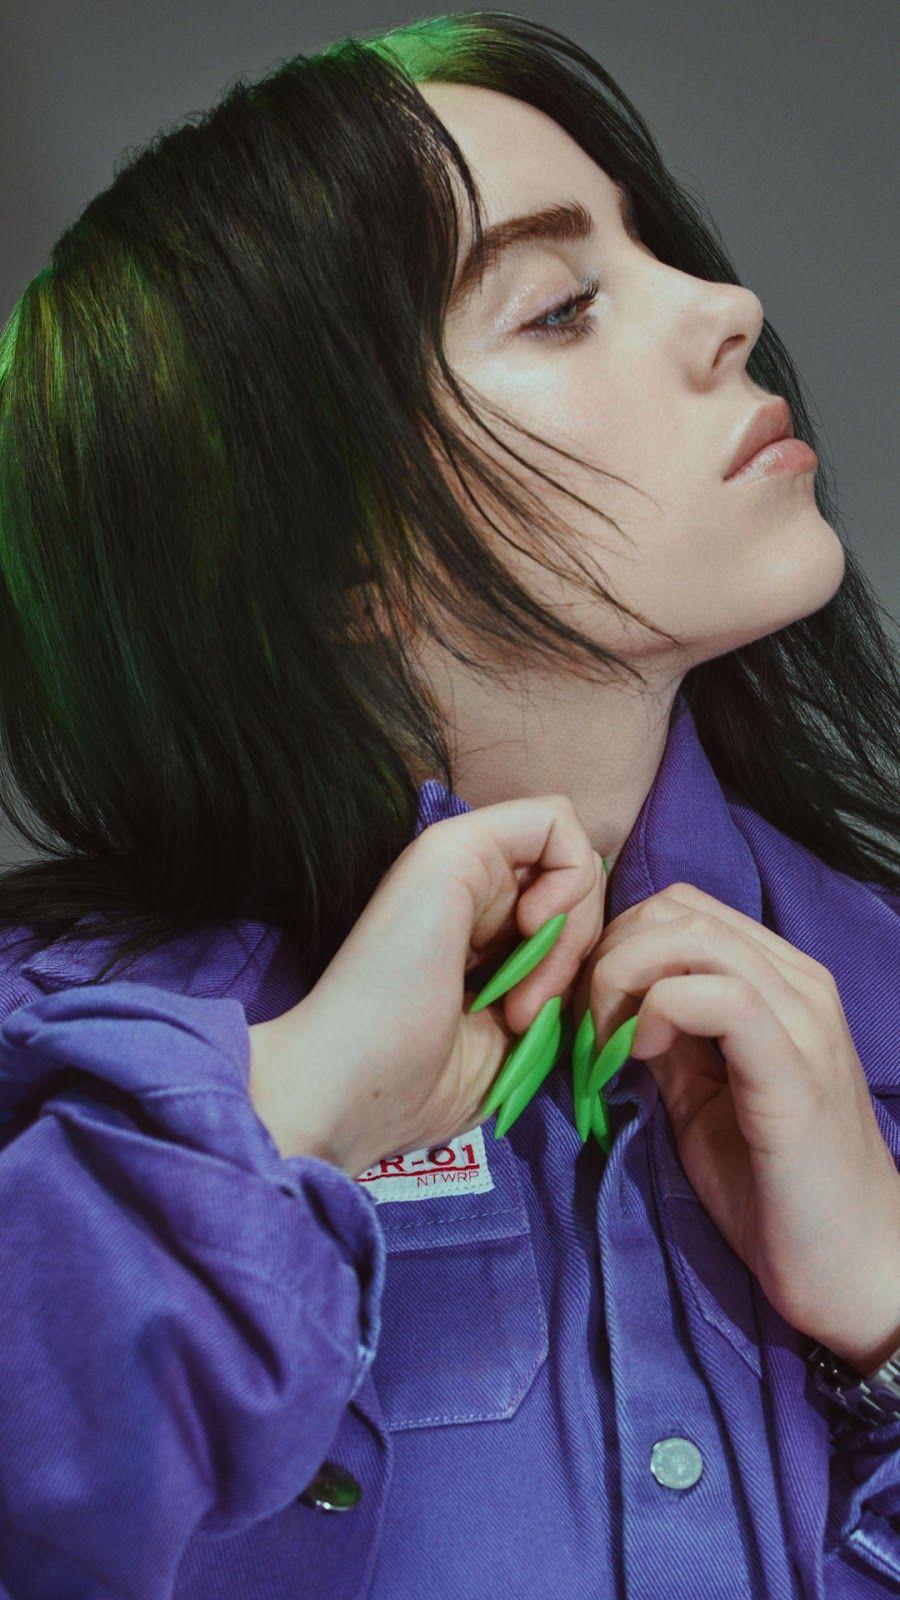 Download Billie Eilish Mobile Wallpaper for your Android, iPhone